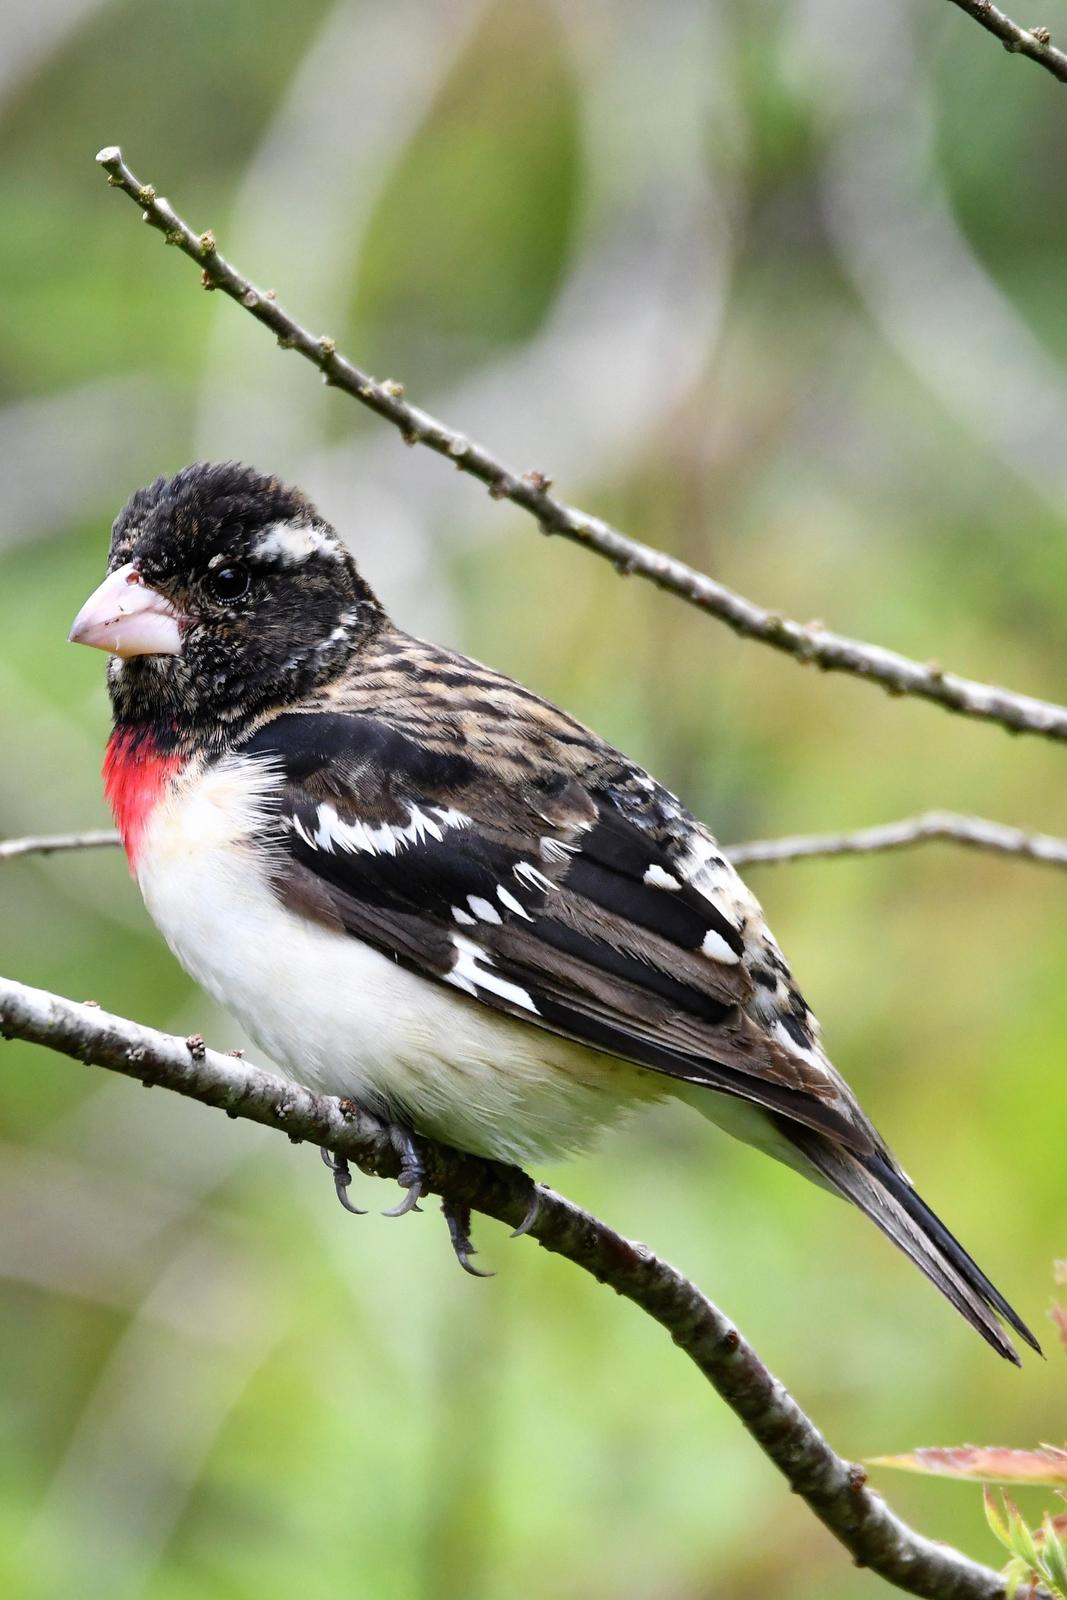 Rose-breasted Grosbeak Photo by Jerry Chen